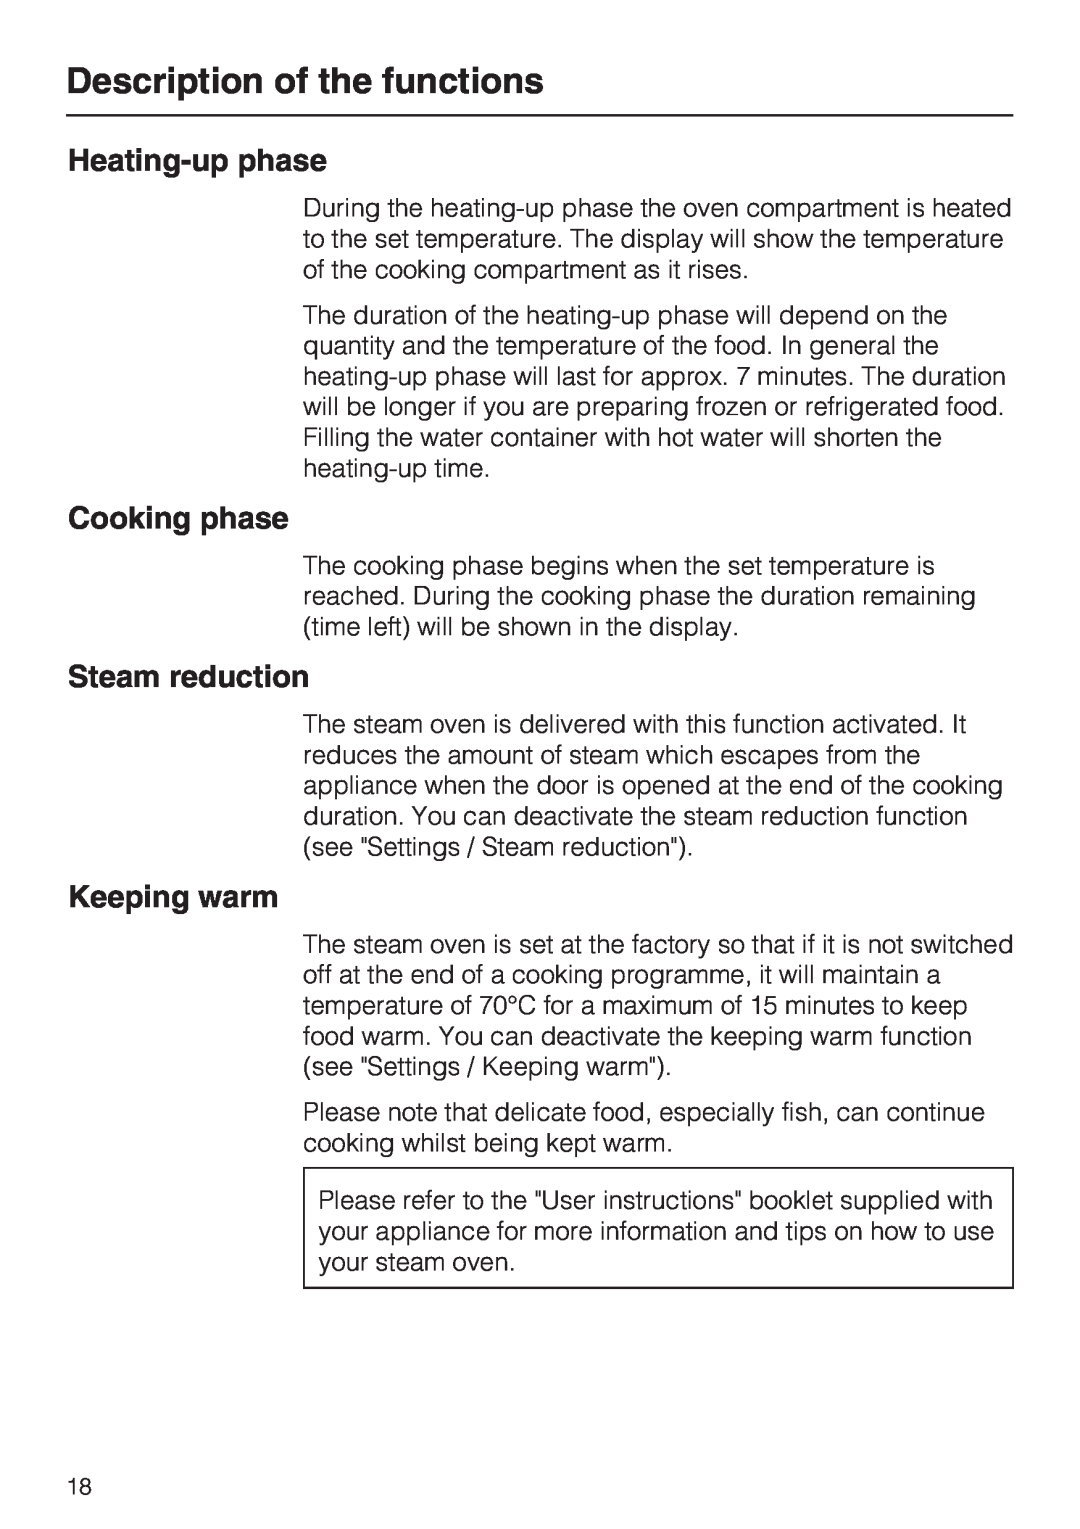 Miele DG 5070, DG 5088 Heating-up phase, Cooking phase, Steam reduction, Keeping warm, Description of the functions 